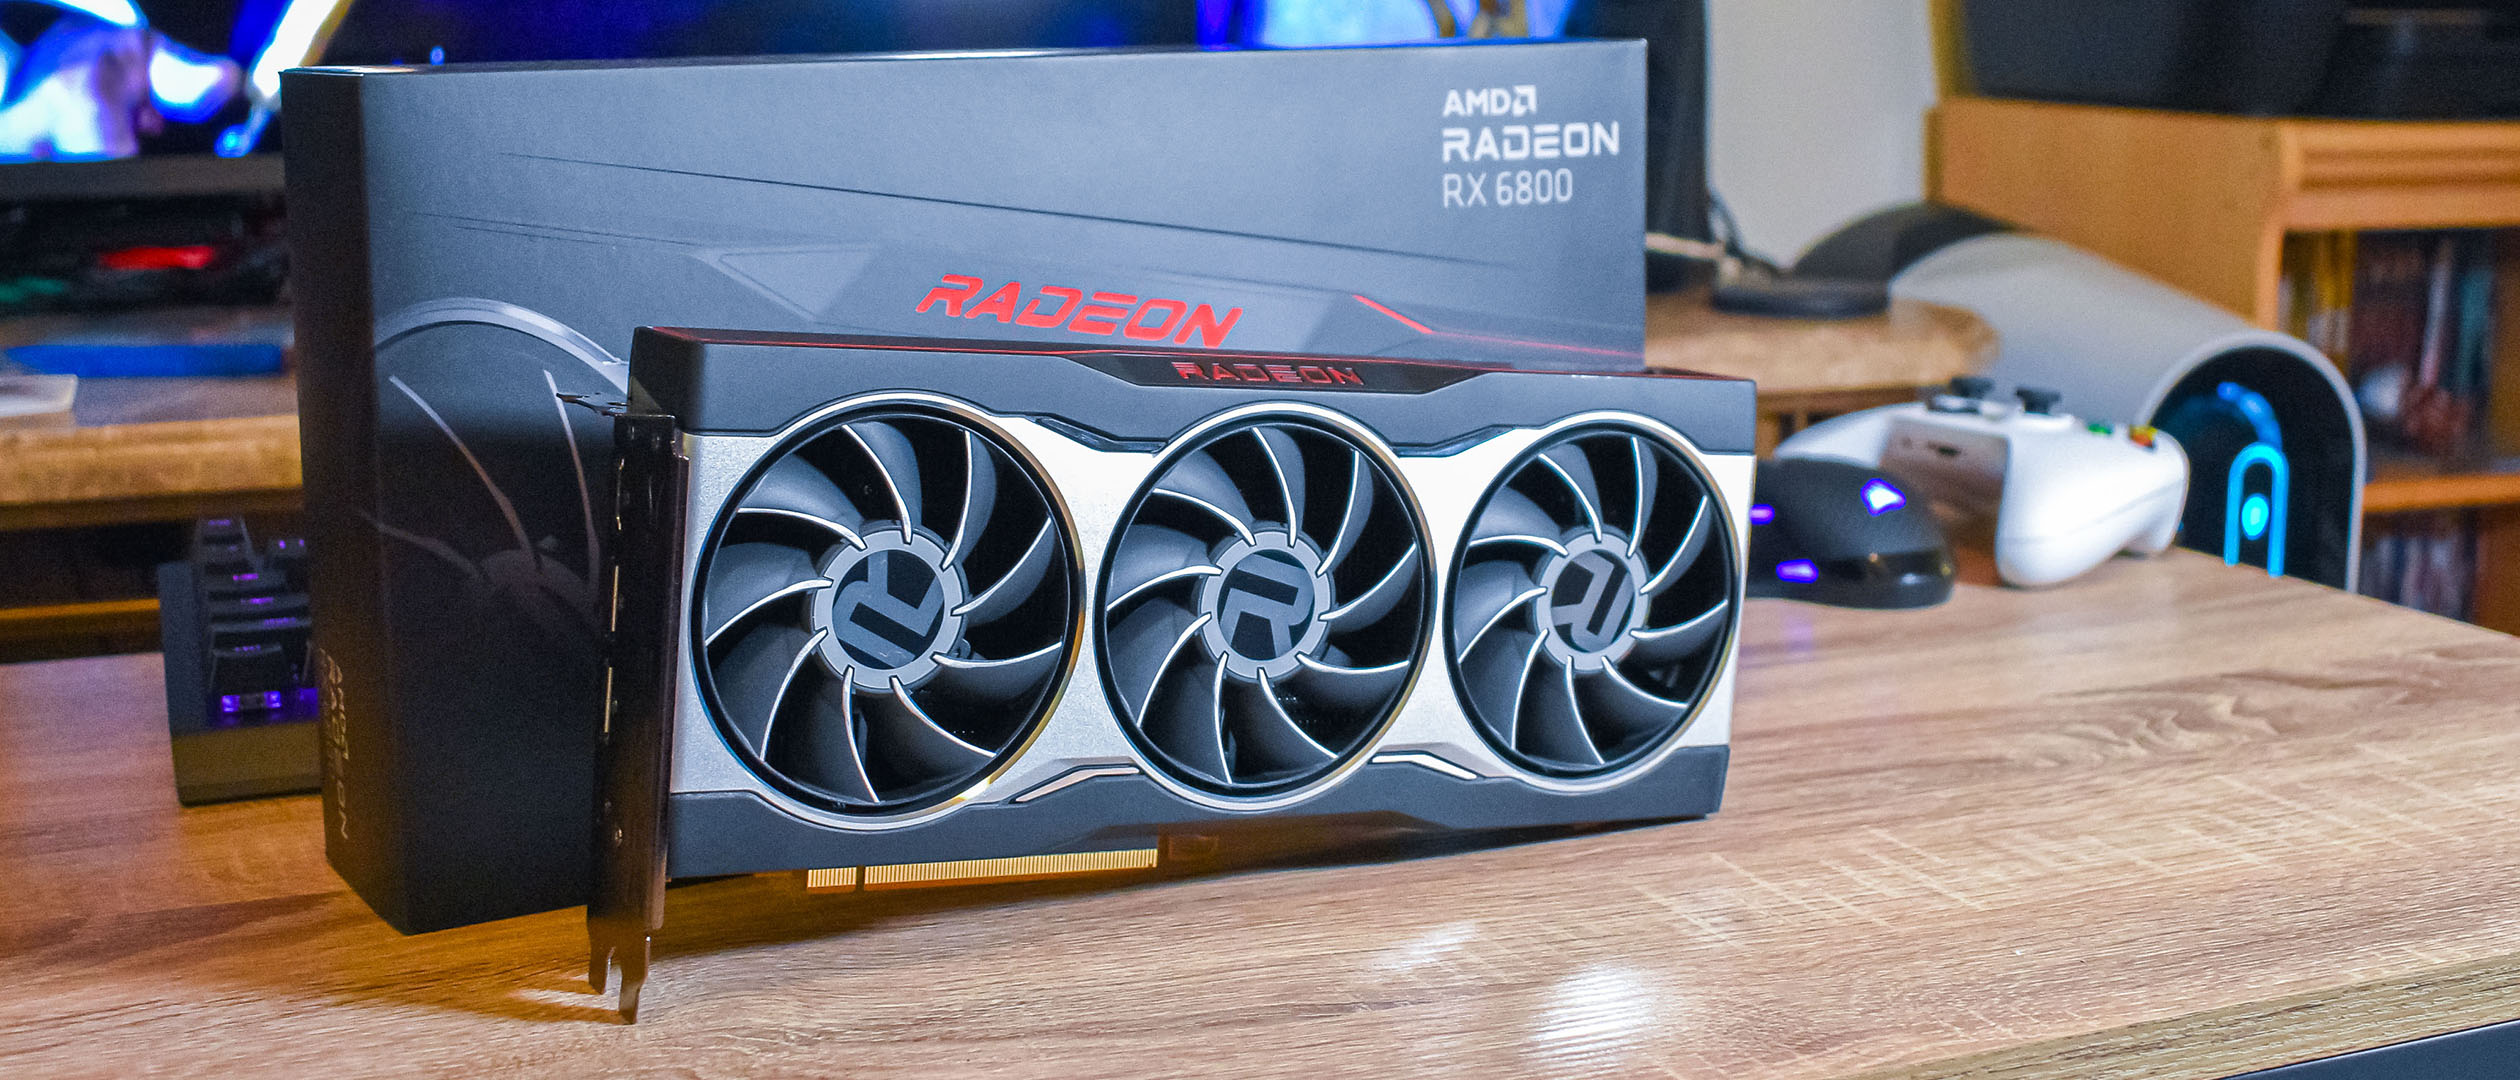 RDNA 2 deep-dive: What's inside AMD's Radeon RX 6000 graphics cards